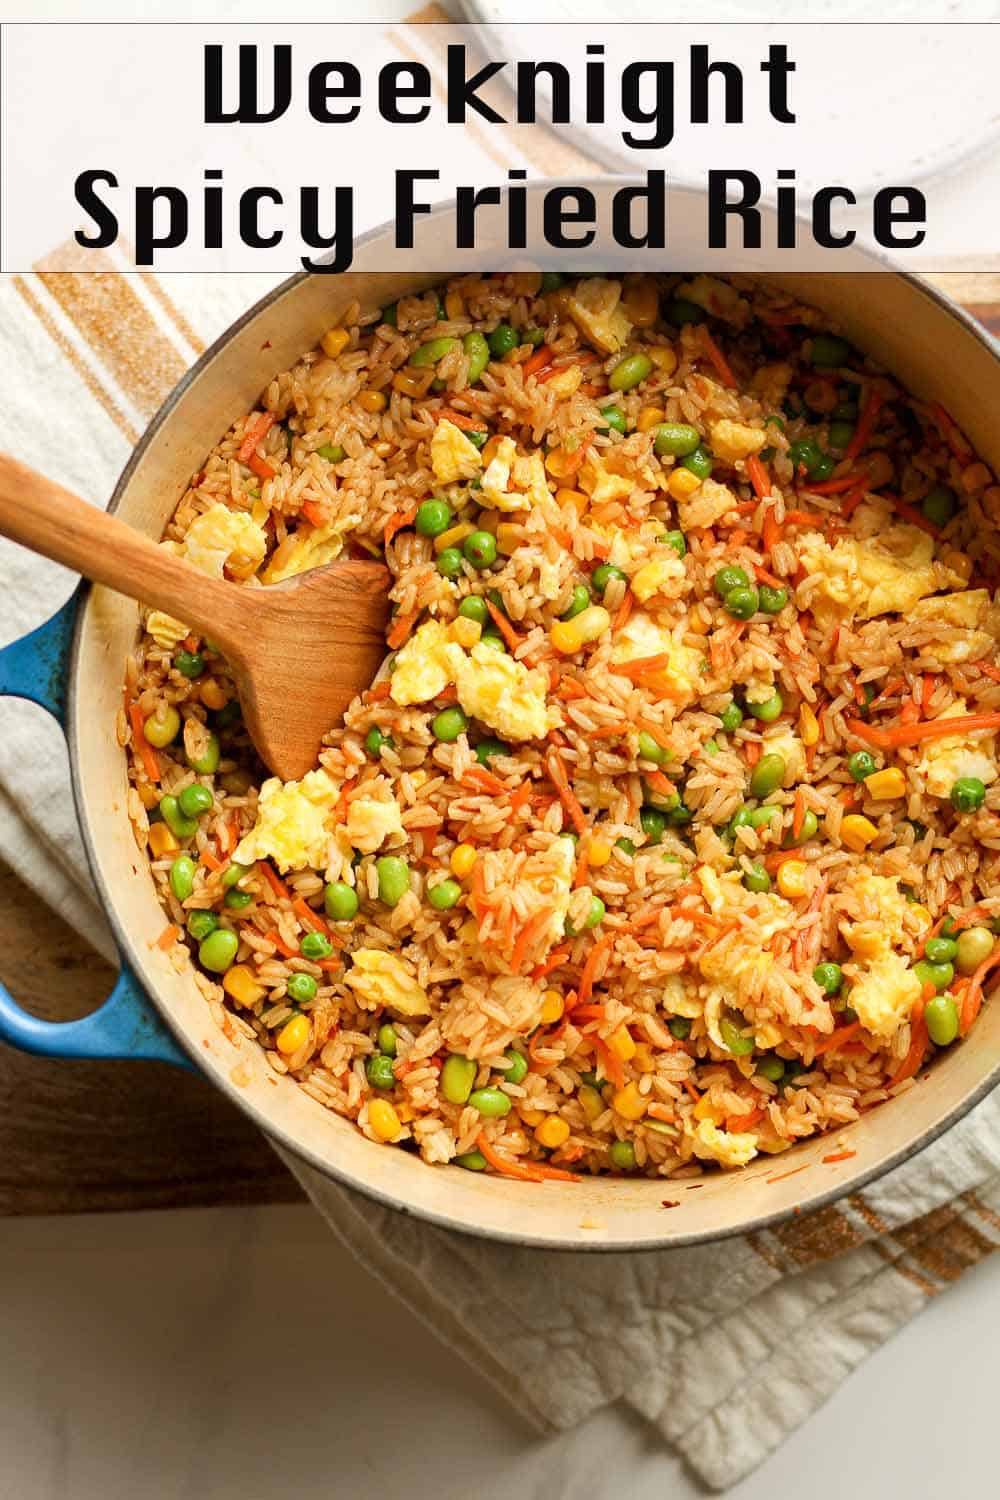 A stock pot of weeknight spicy fried rice.